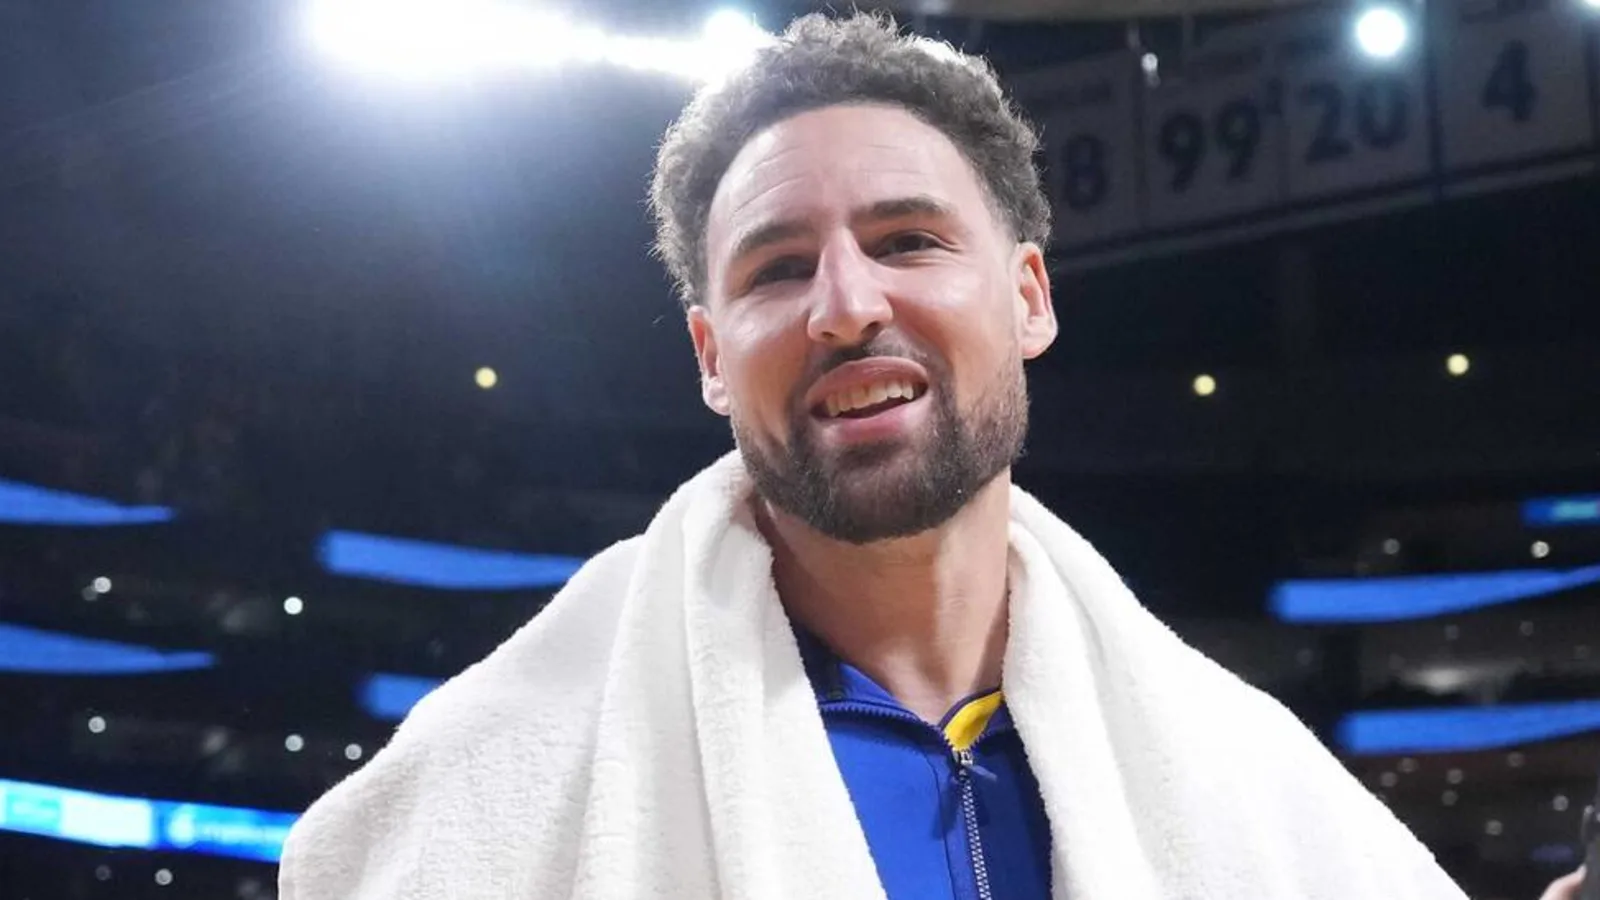 Orlando Magic, Klay Thompson reportedly have “Mutual Interest”